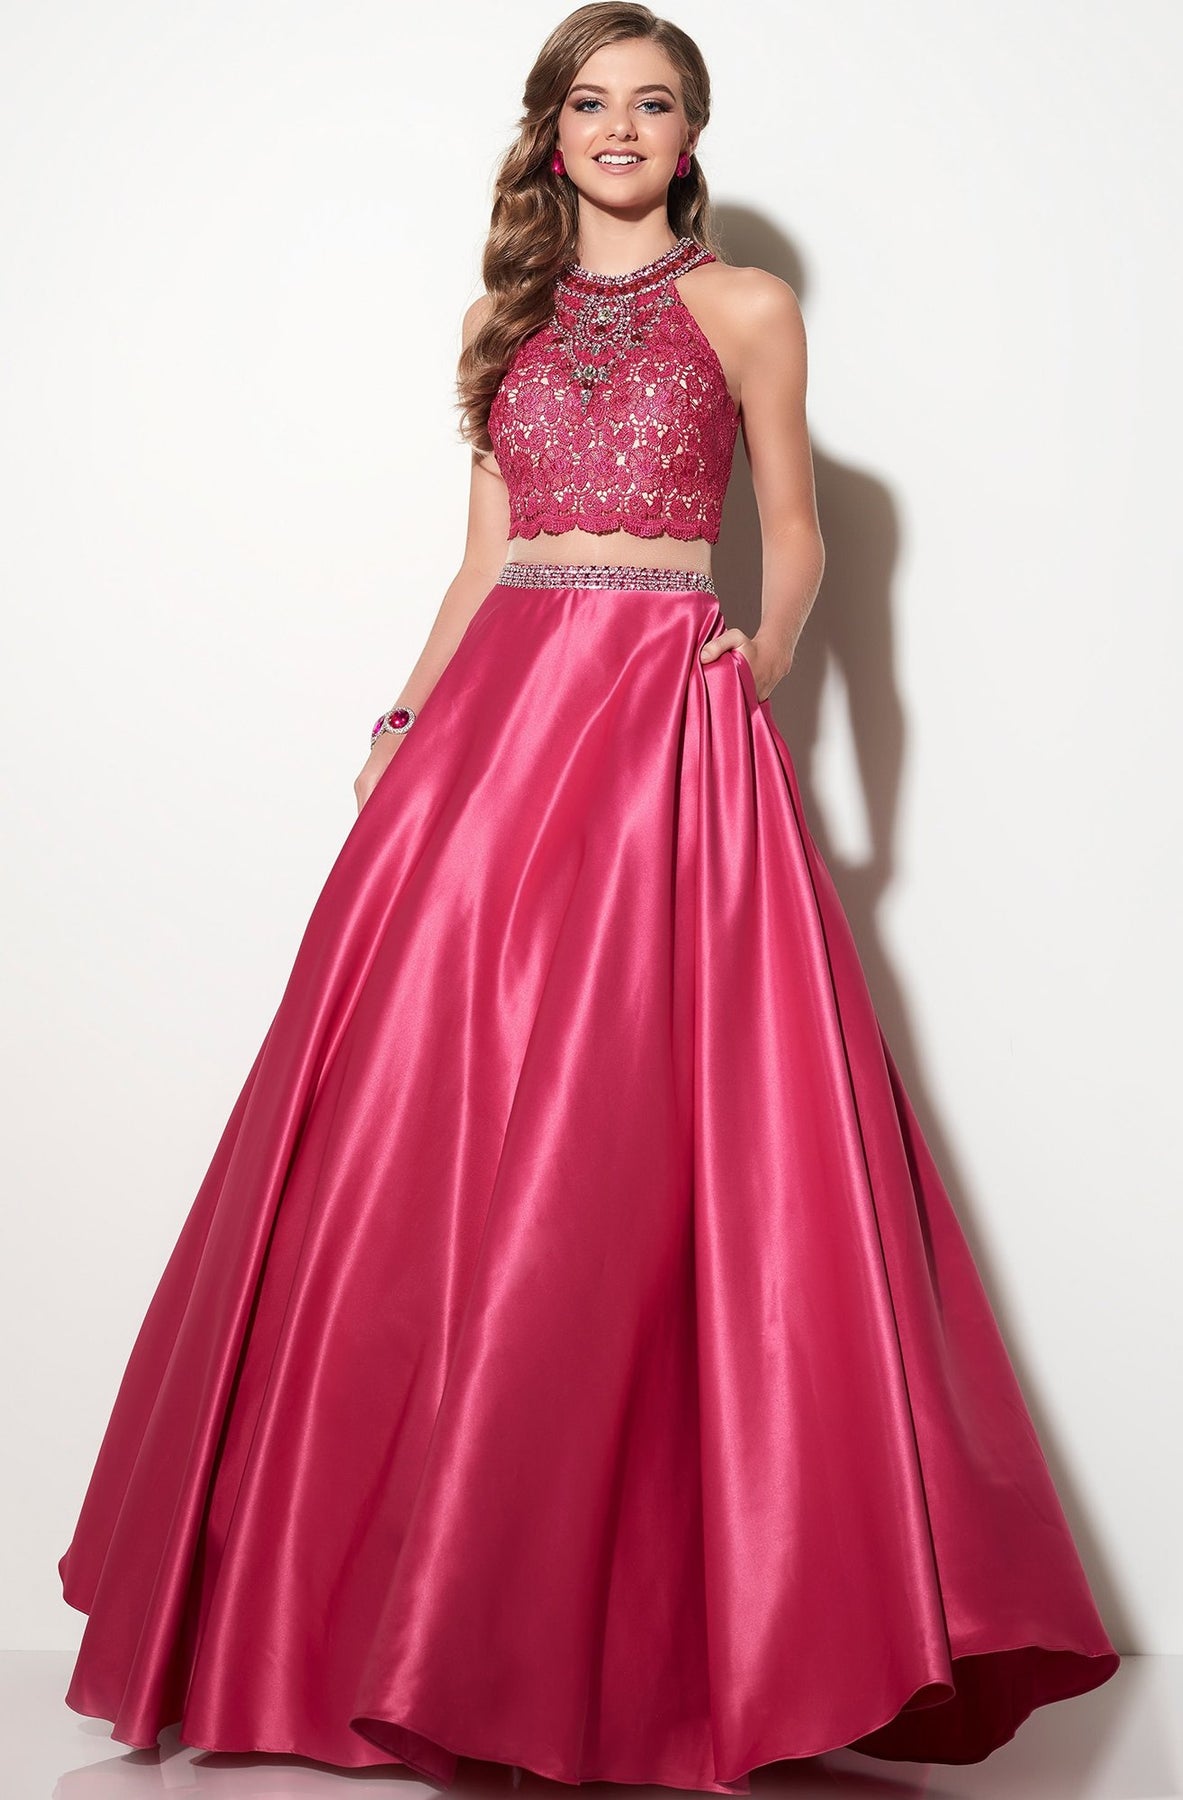 Studio 17 - Two-piece Bead and Lace Embellished Halter Neck Satin Ball Gown 12643 In Red